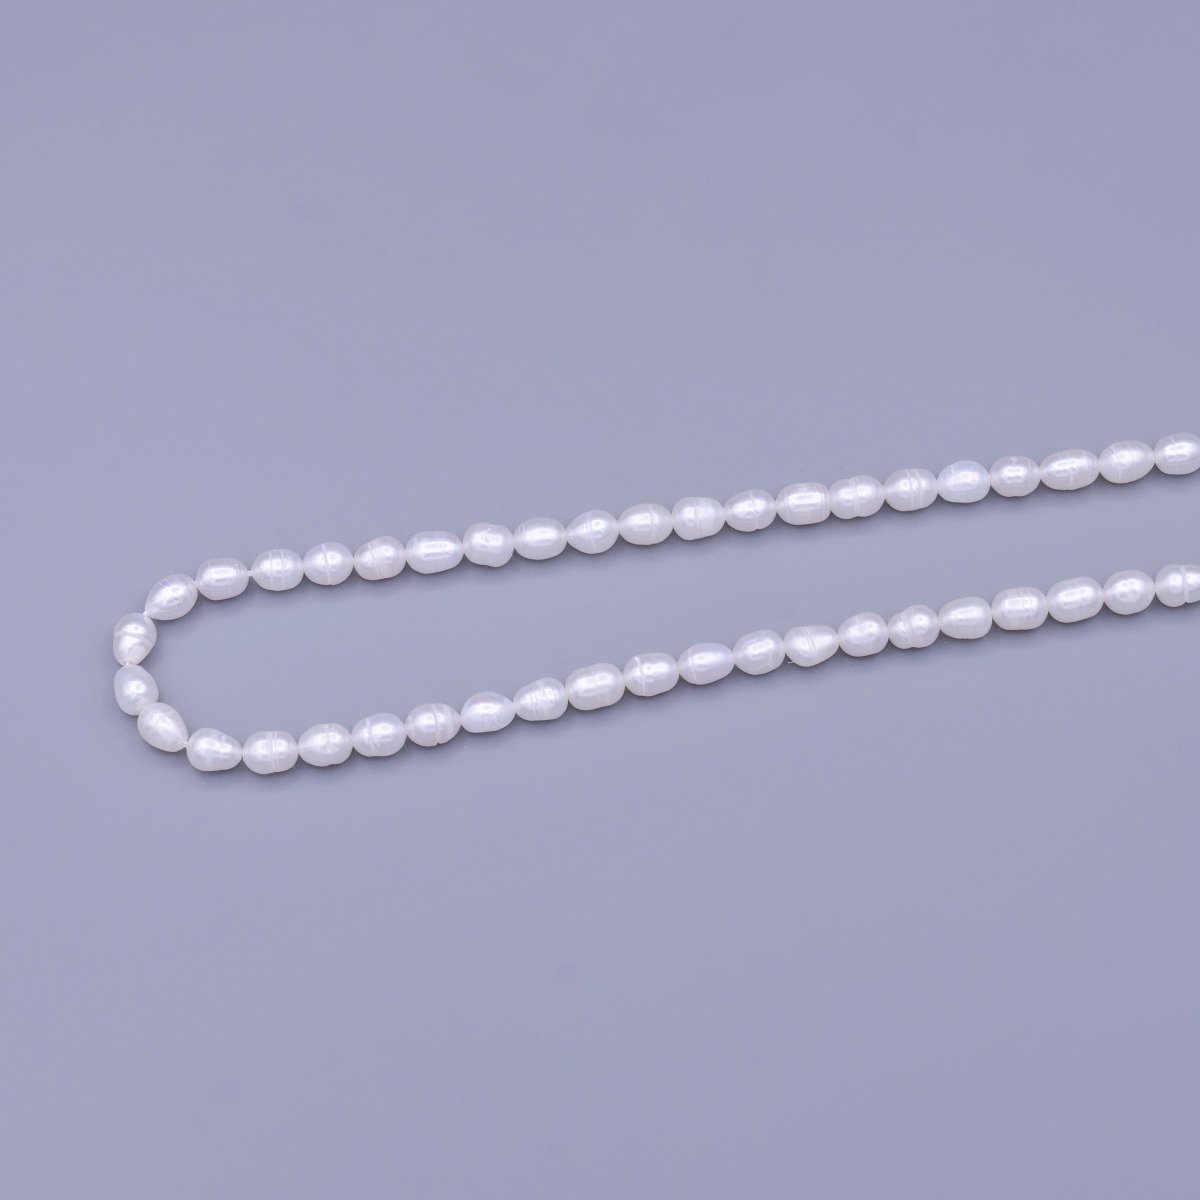 4.8mm Ringed Oval Freshwater Pearl 60 Pieces/Strand Jewelry Making Findings Supply | WA-1668 Clearance Pricing - DLUXCA